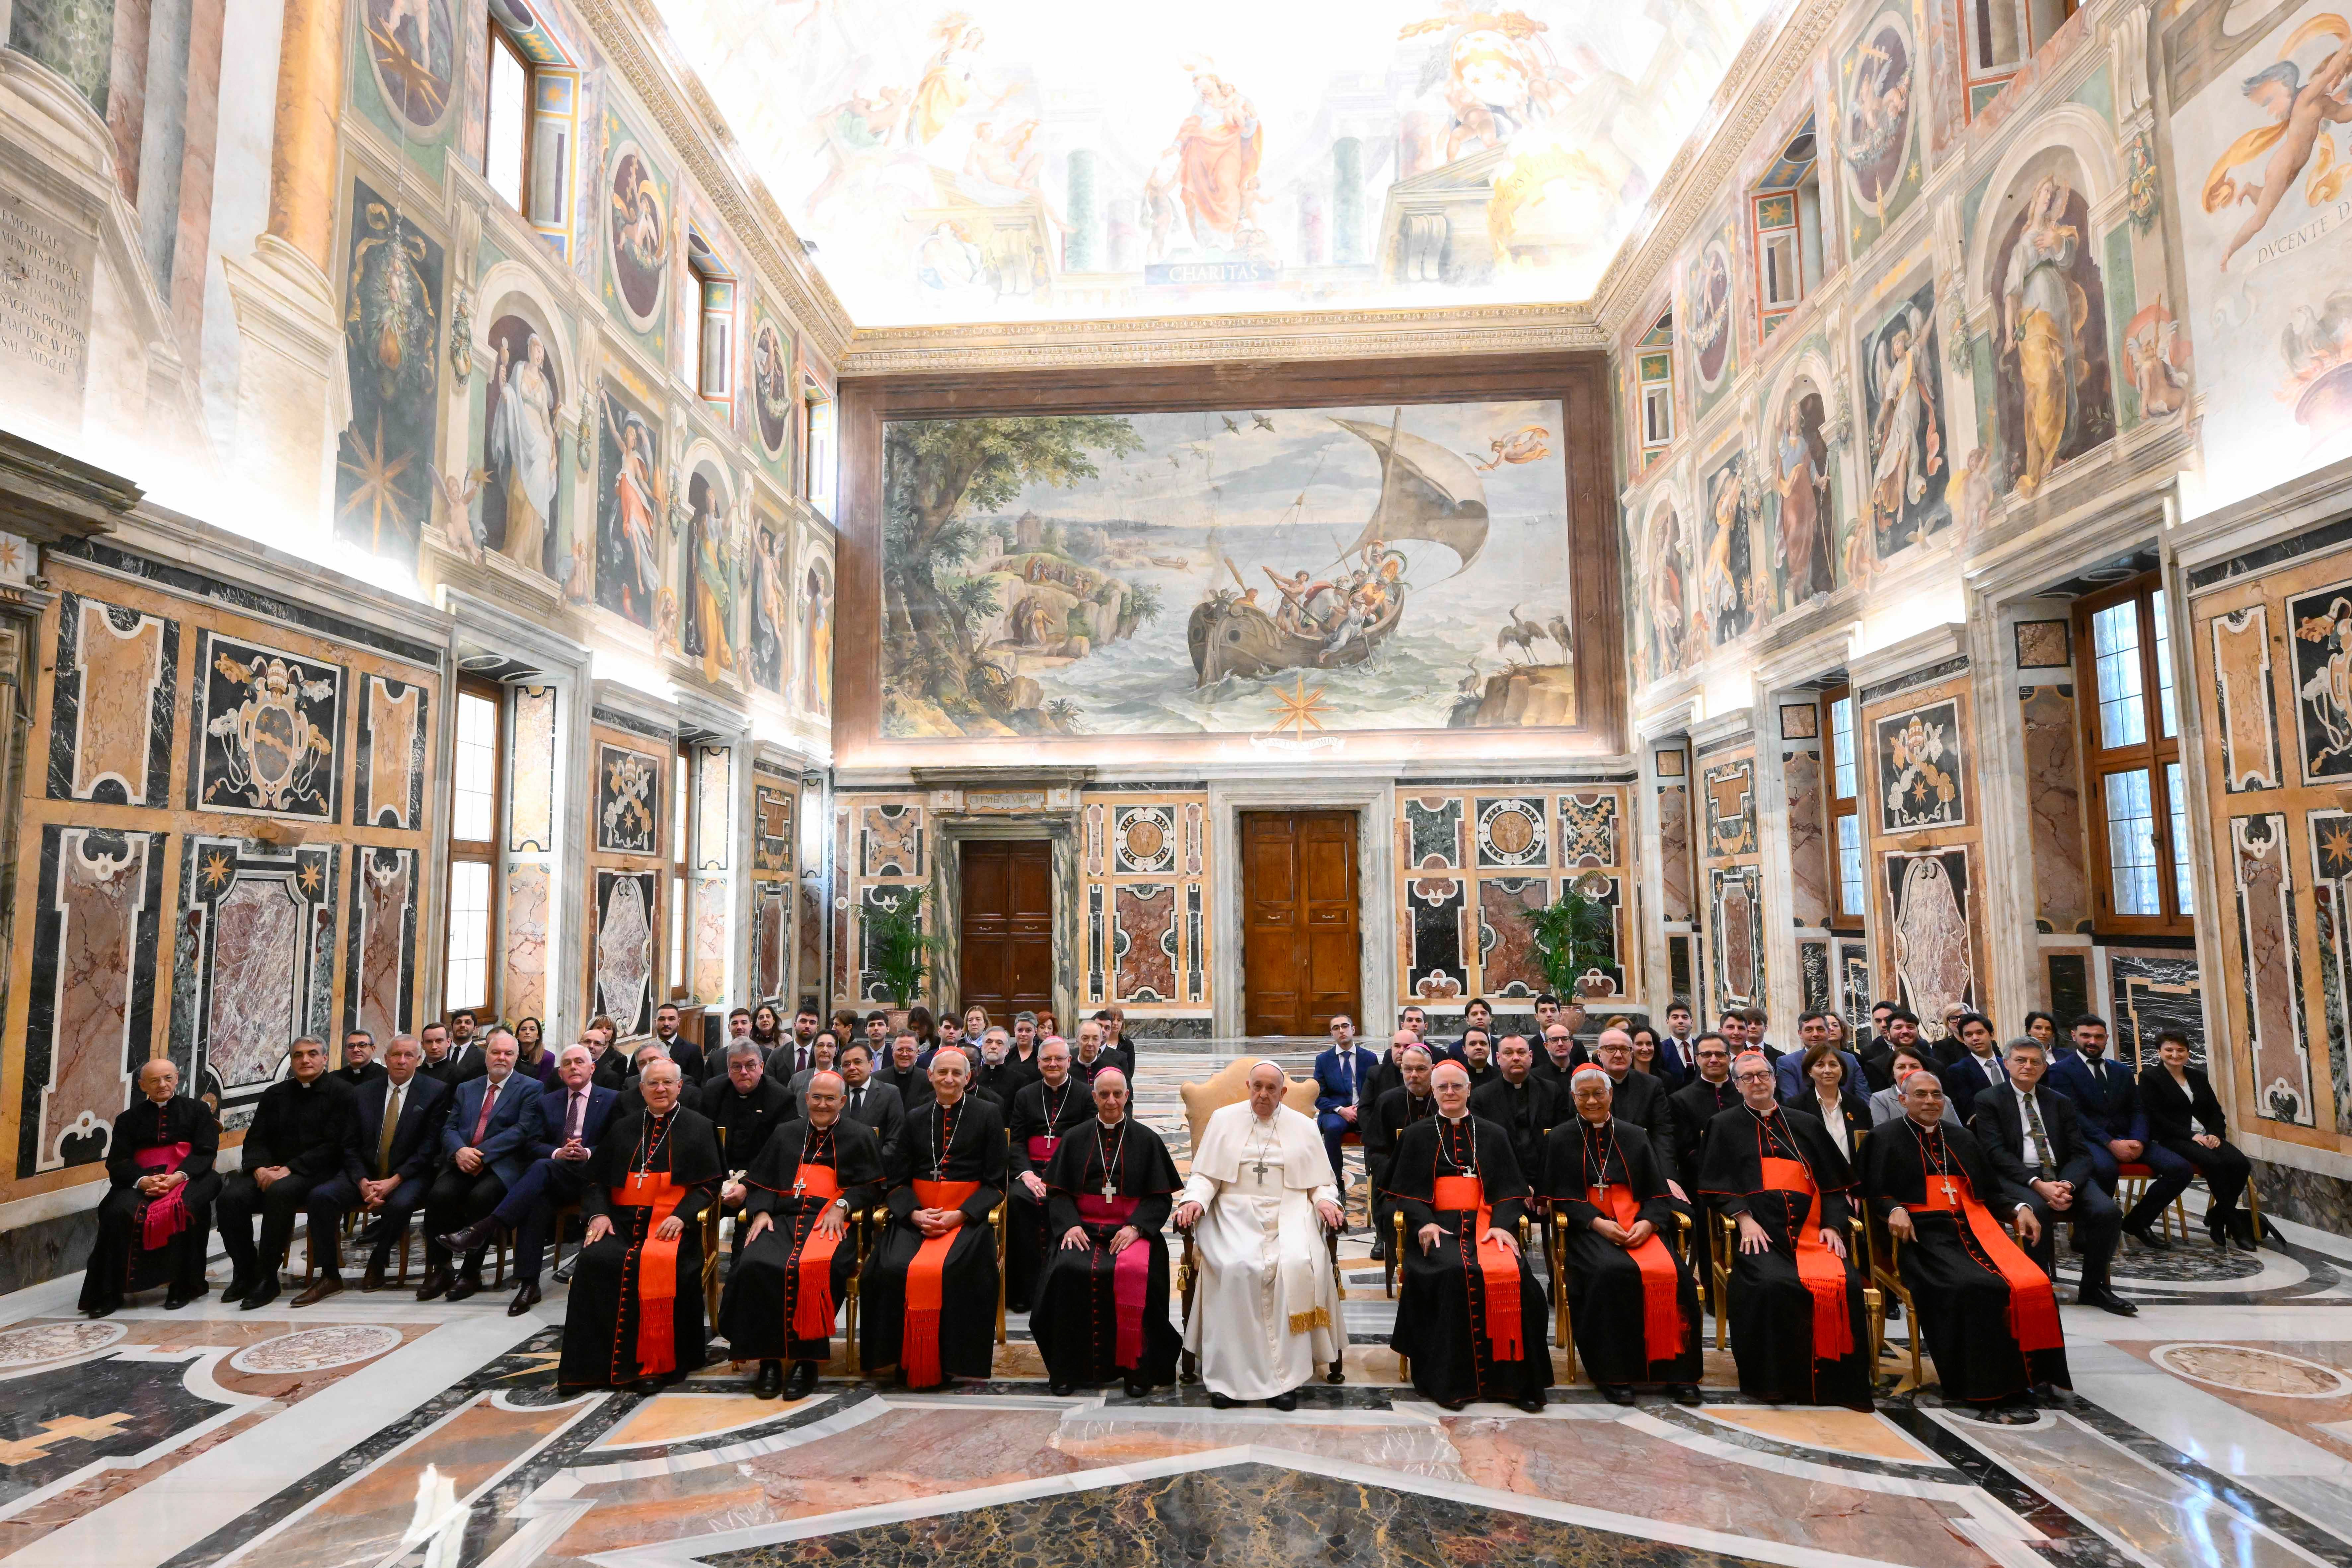 Pope Francis poses for a photo with members of the Dicastery for Evangelization.